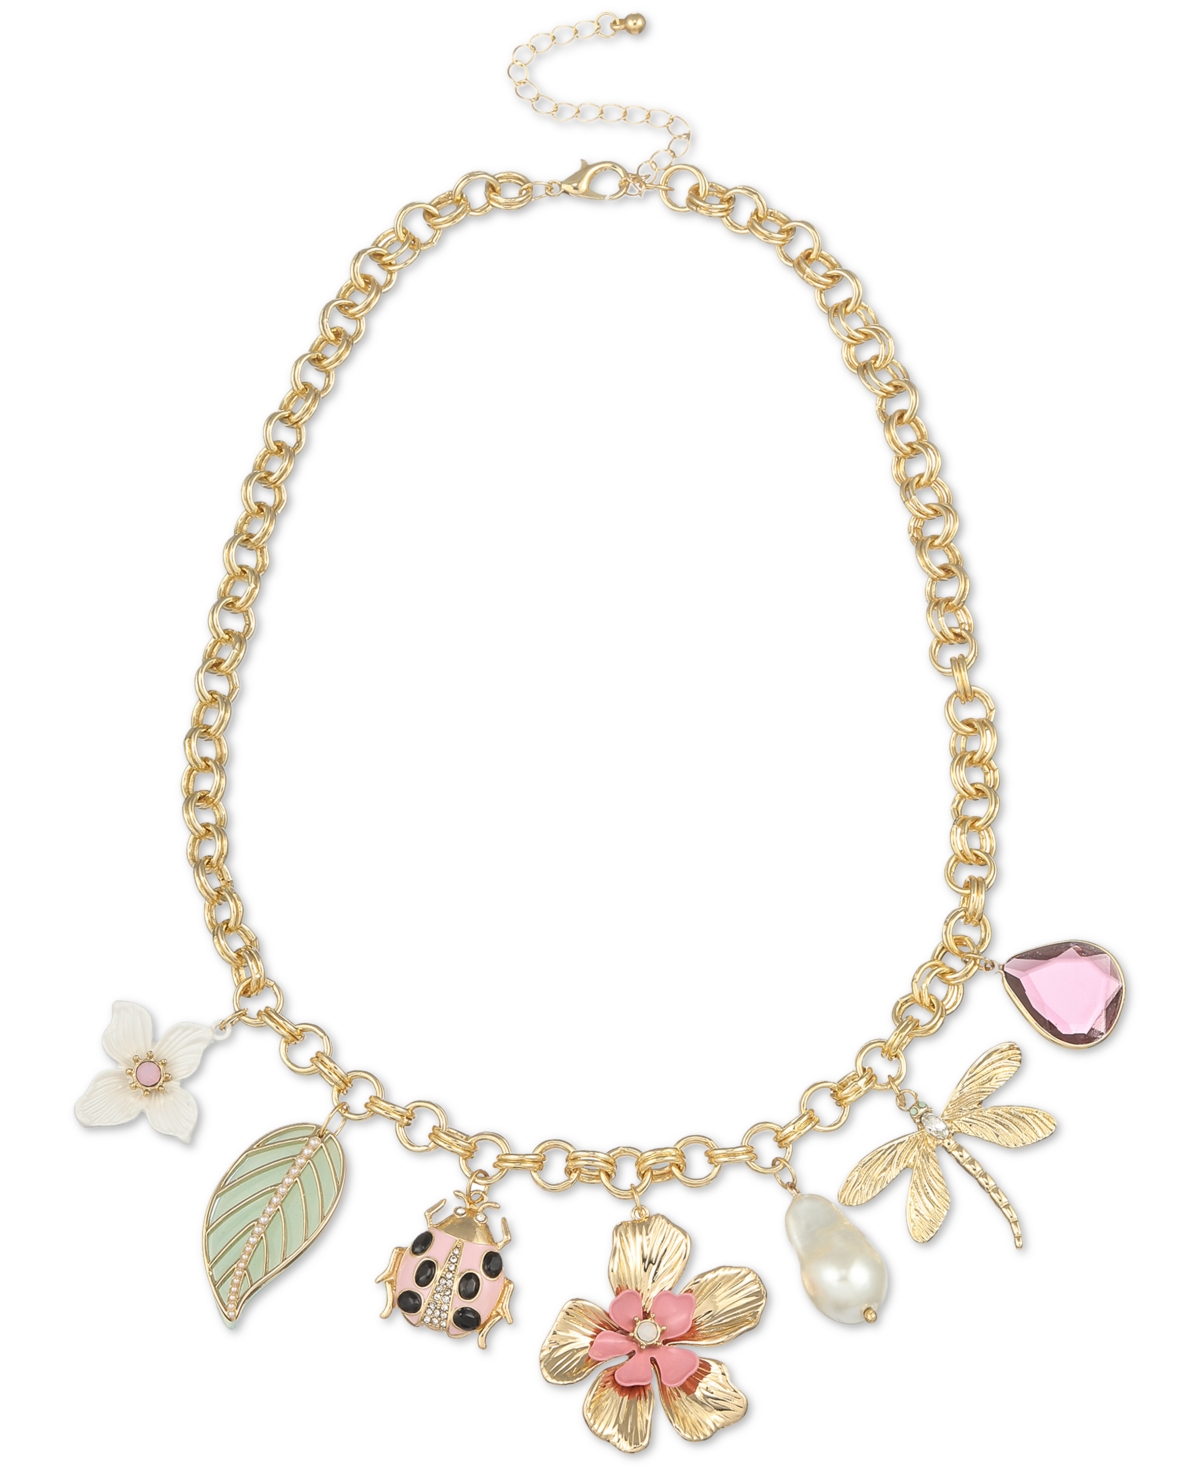 Flower Show Gold-Tone Charm Necklace, Created for Macy's - Gold